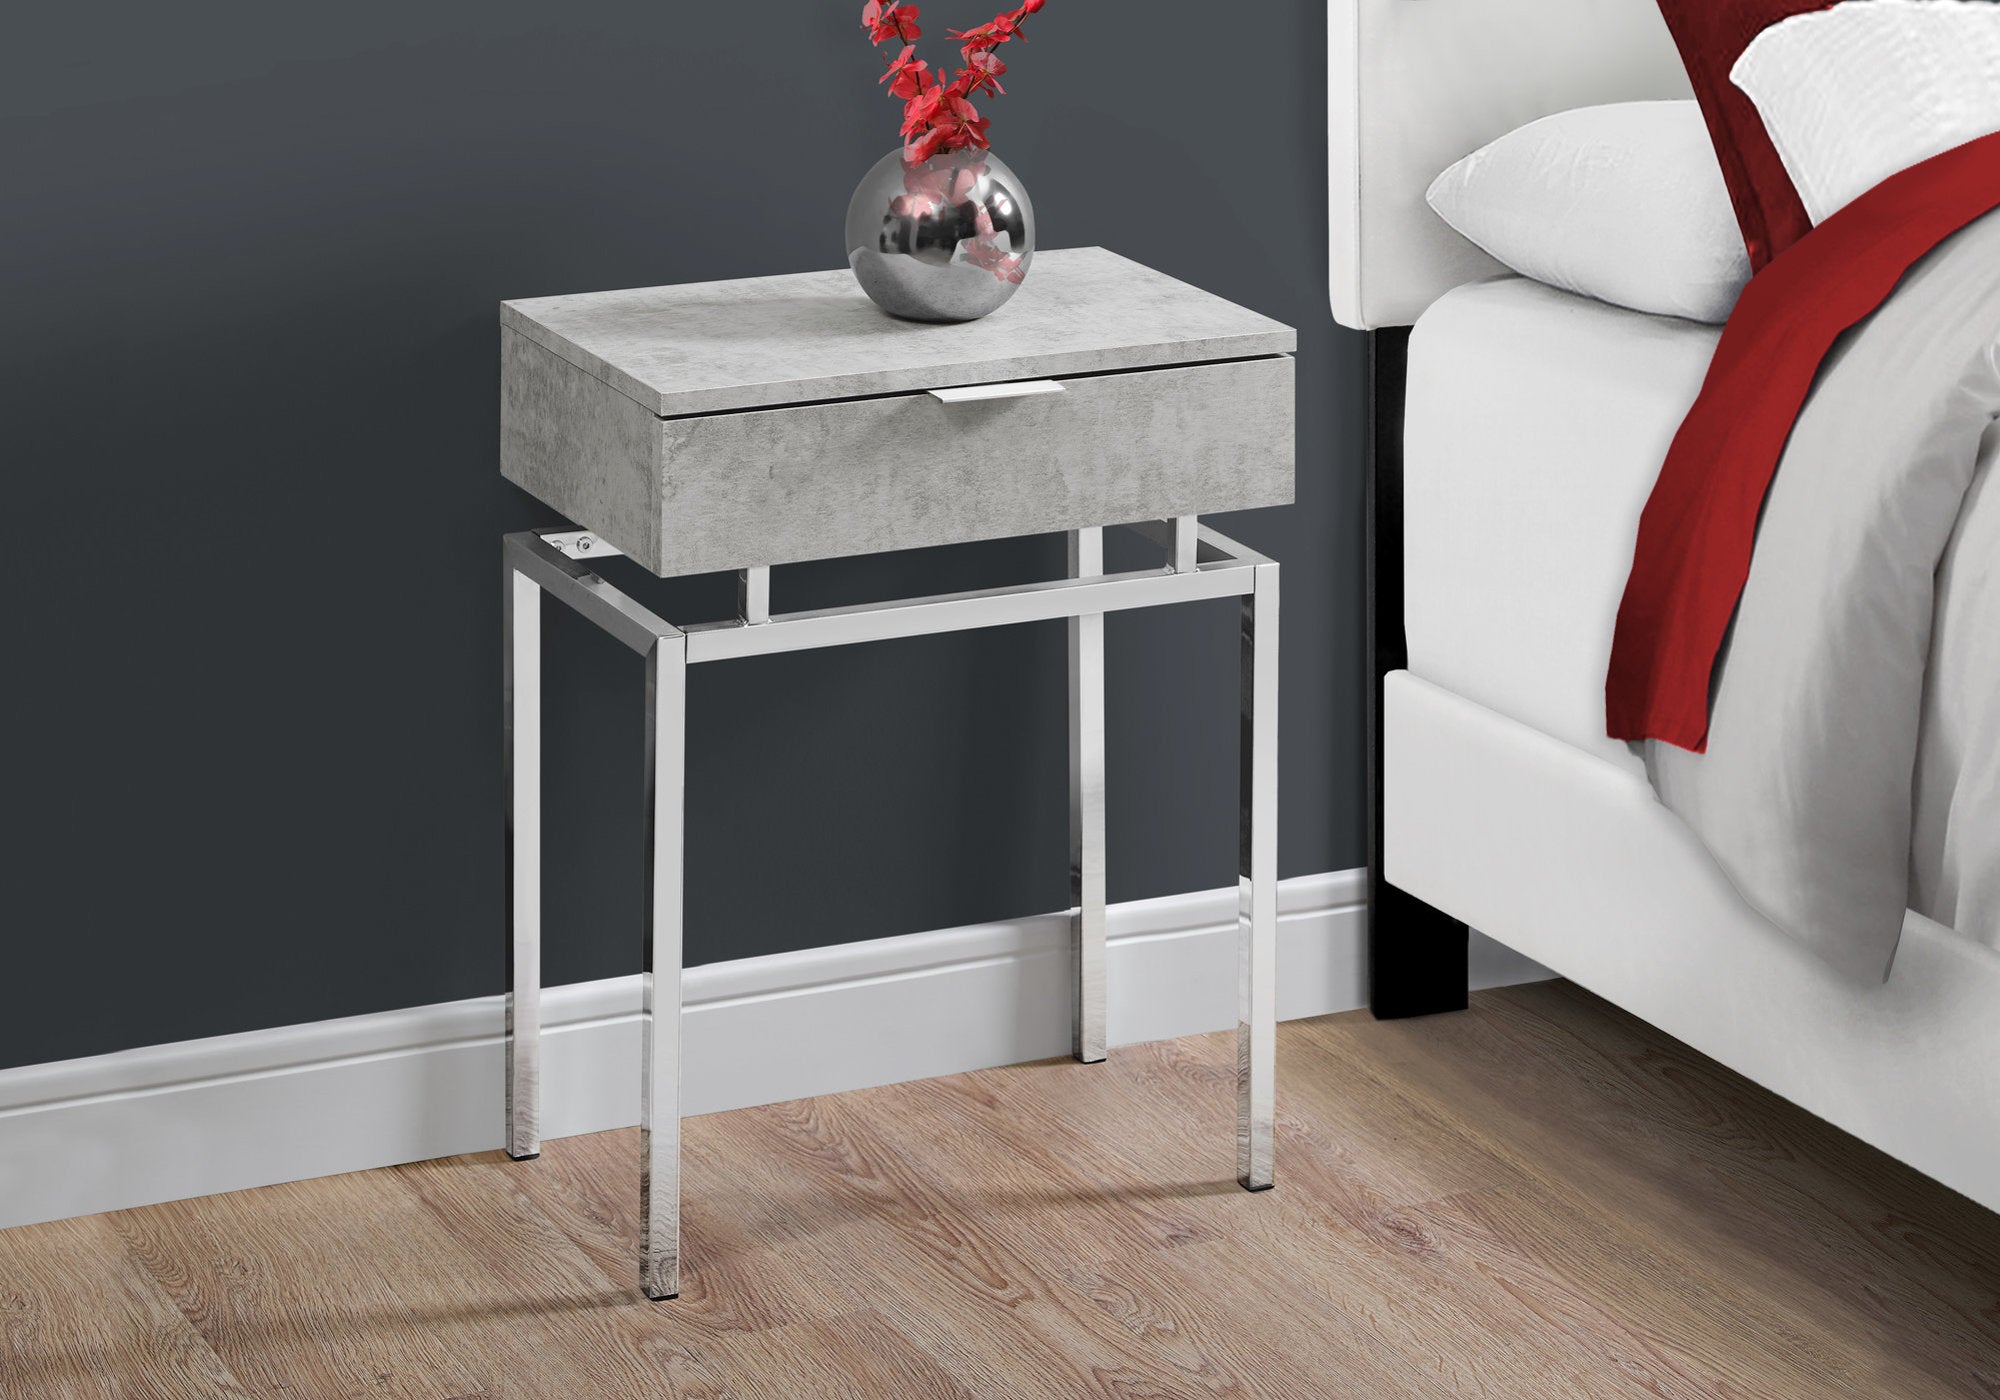 MN-753461    Accent Table, Side, End, Nightstand, Lamp, Living Room, Bedroom, Metal Legs, Laminate, Grey Cement Look, Chrome, Contemporary, Modern